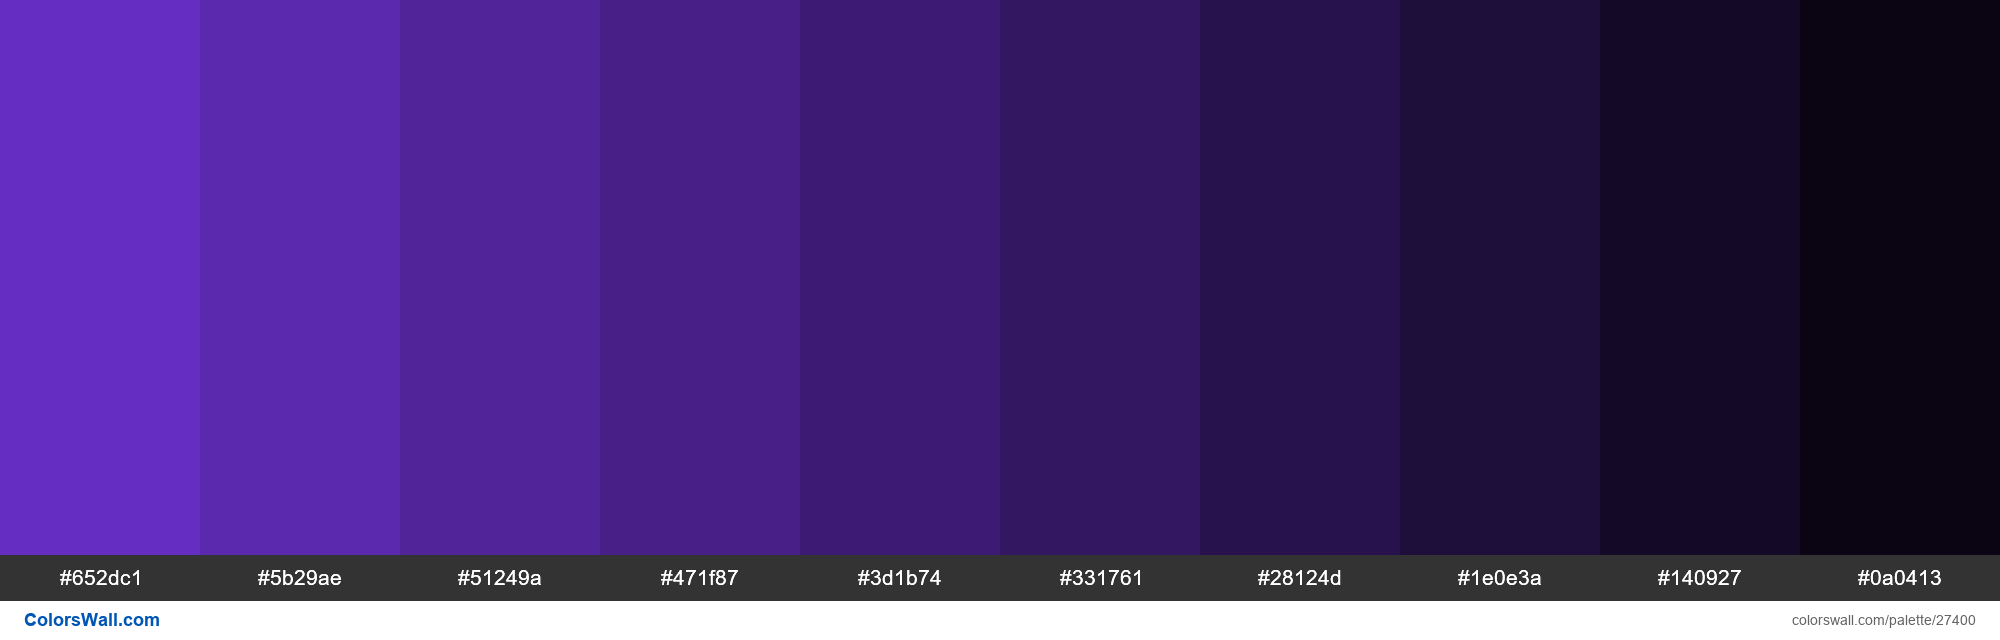 Shades of Purple Heart color #652DC1 hex - ColorsWall